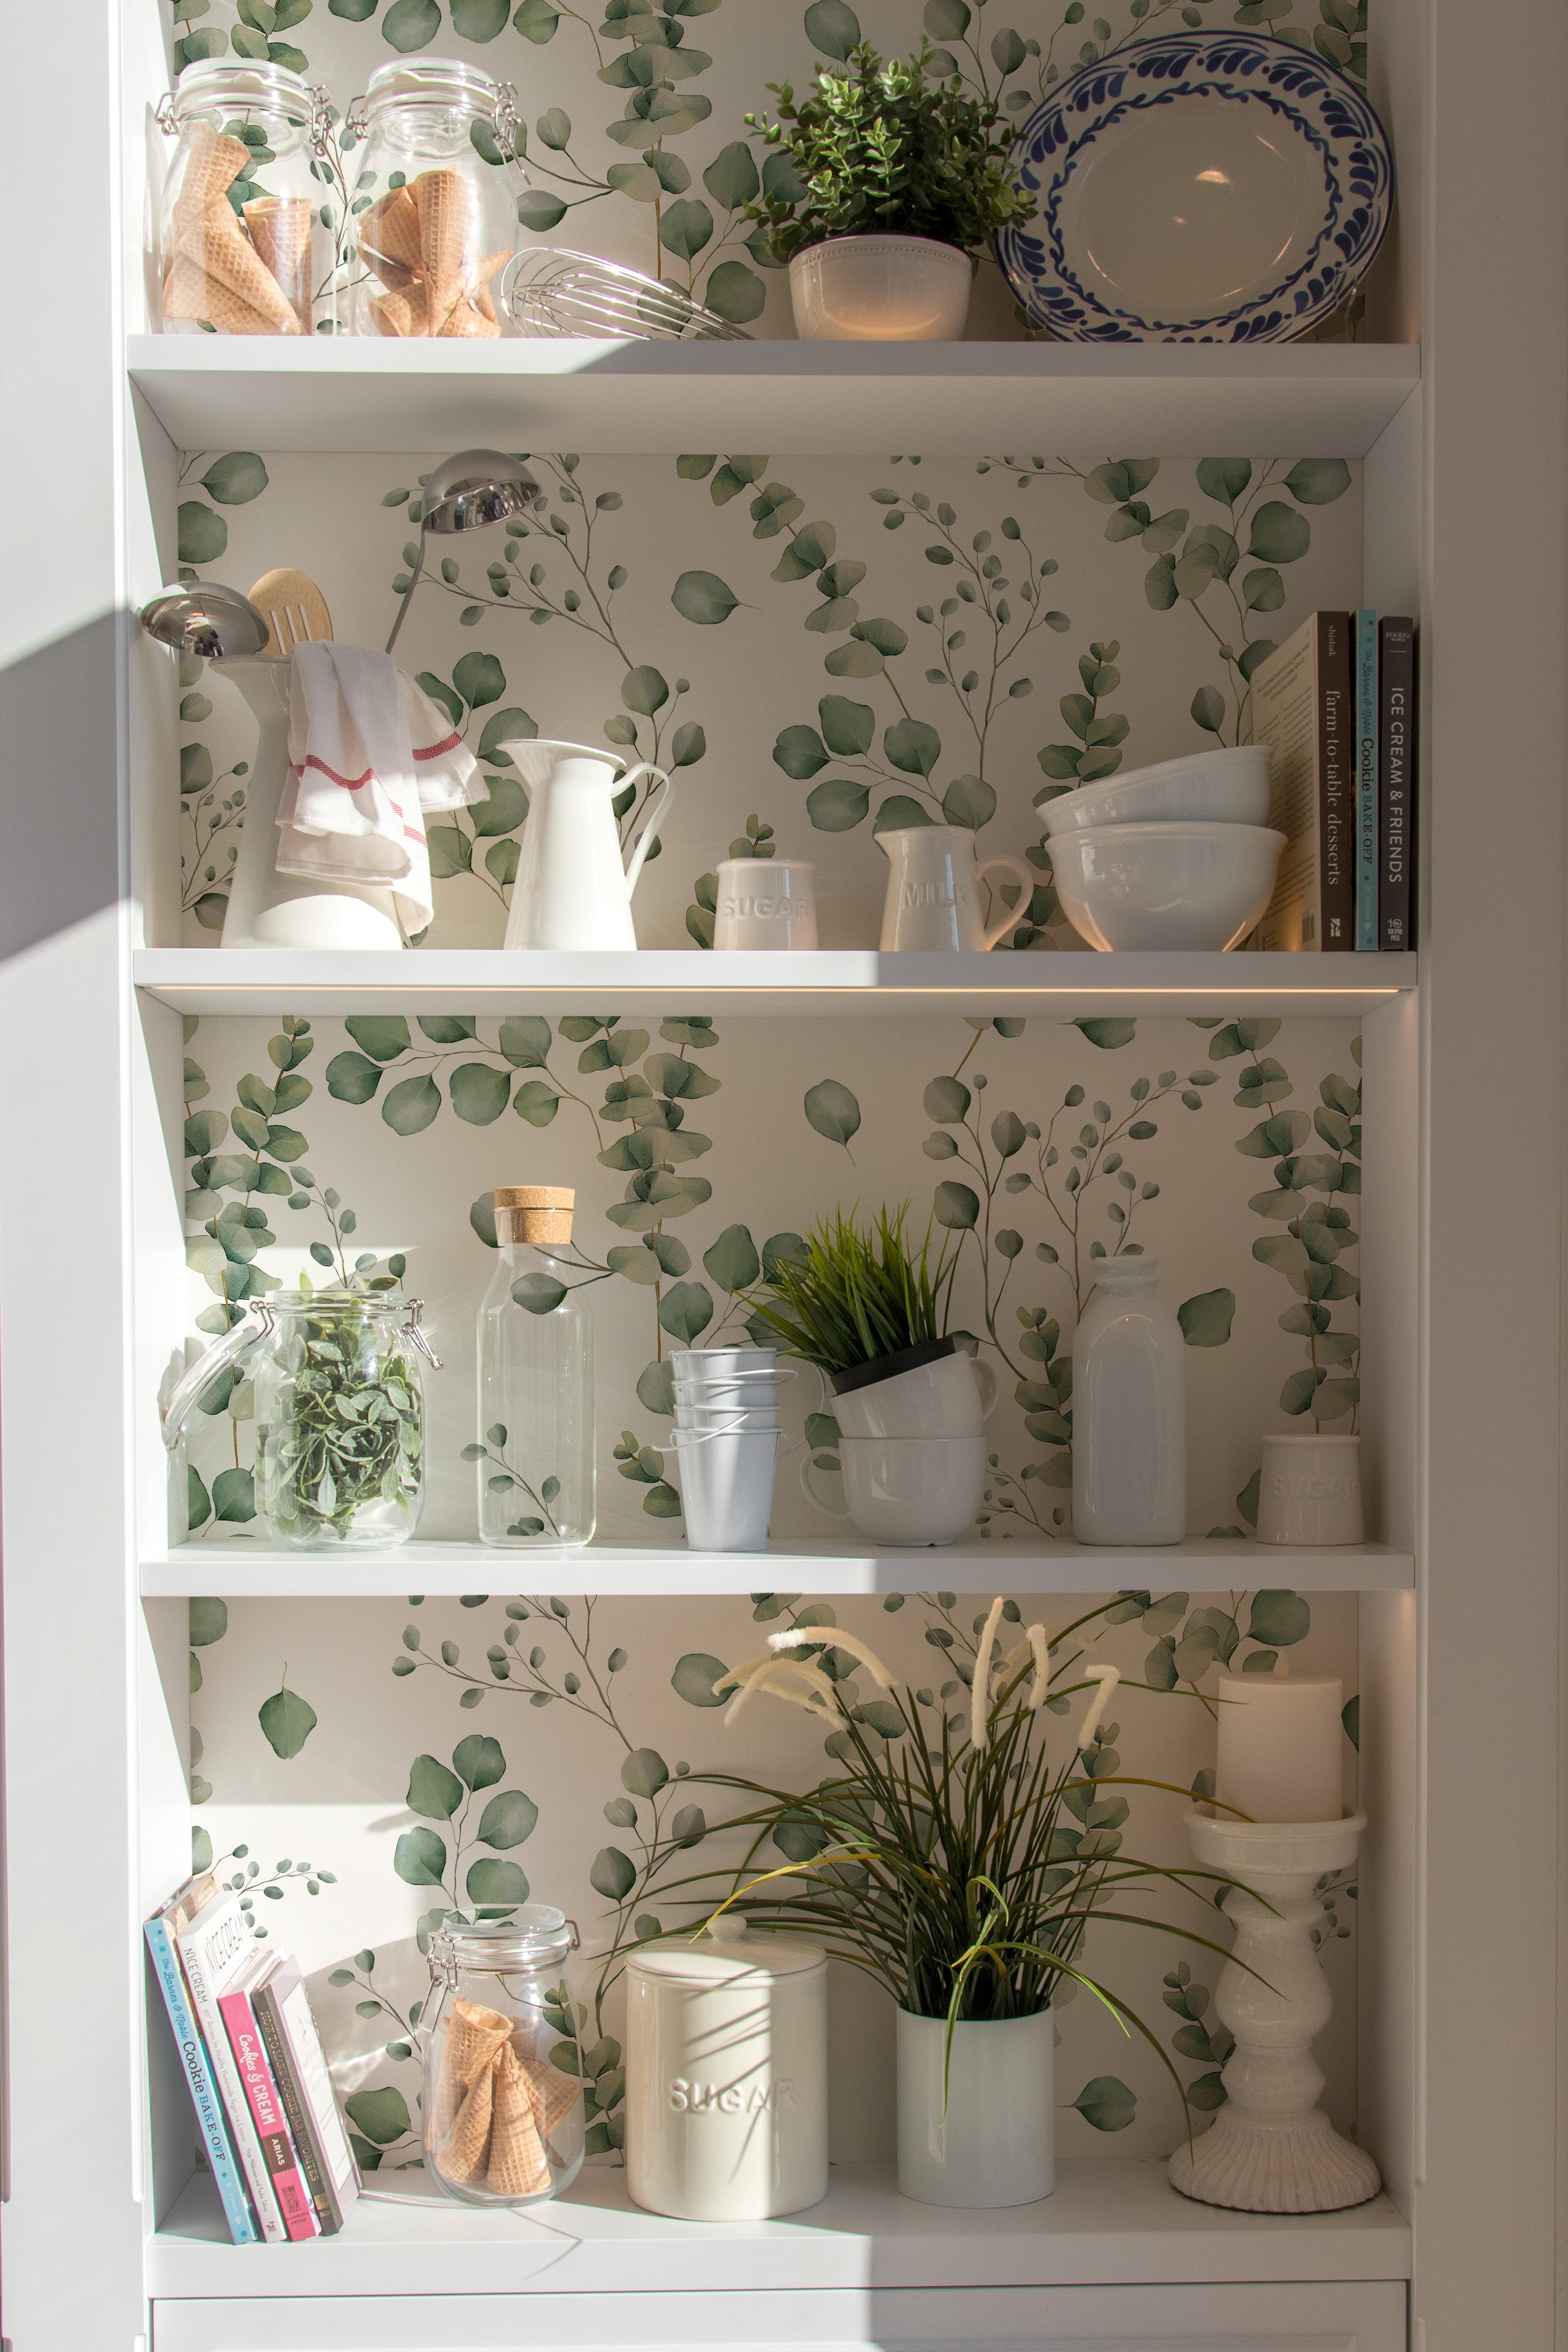 A styled interior setting showcasing shelves lined with the same eucalyptus leaf wallpaper. The shelves are decorated with items like books, white ceramic jars, and green plants, creating a cohesive, tranquil decor theme that complements the wallpaper's botanical design.